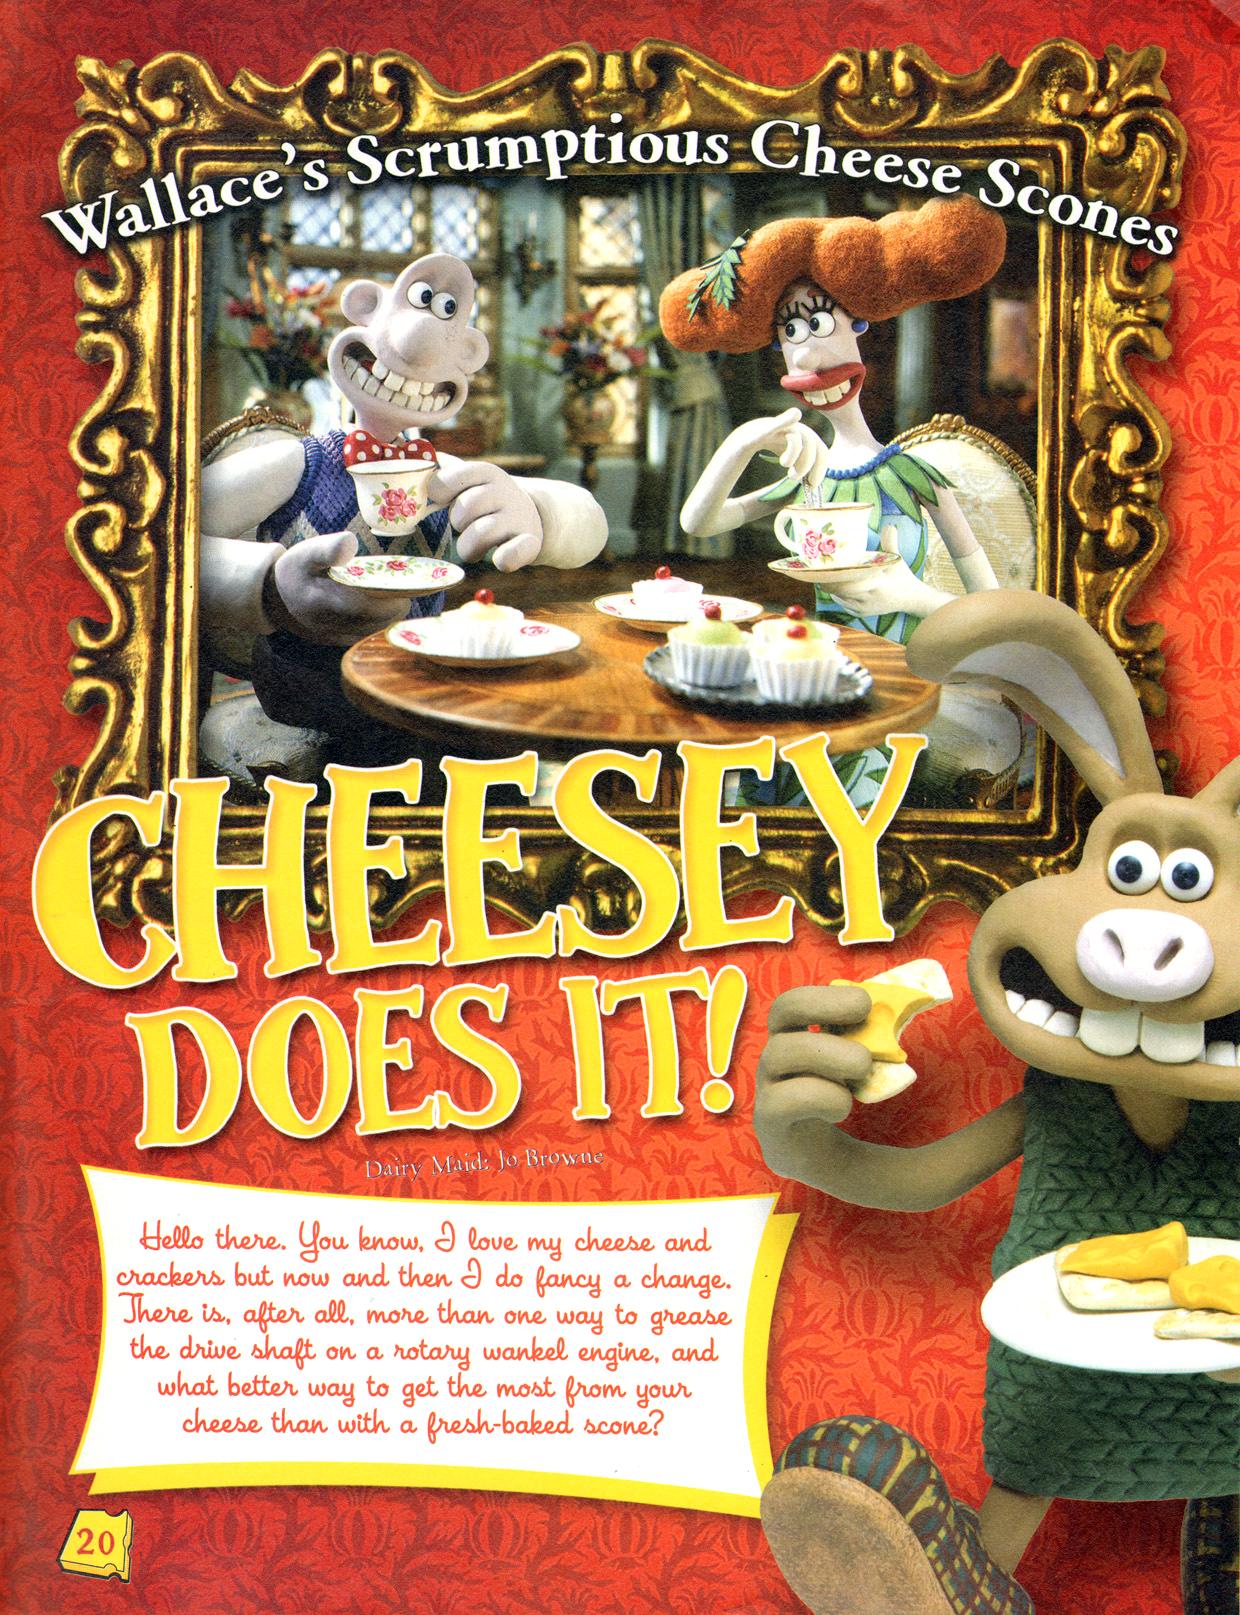 Read online Wallace & Gromit Comic comic -  Issue #10 - 20